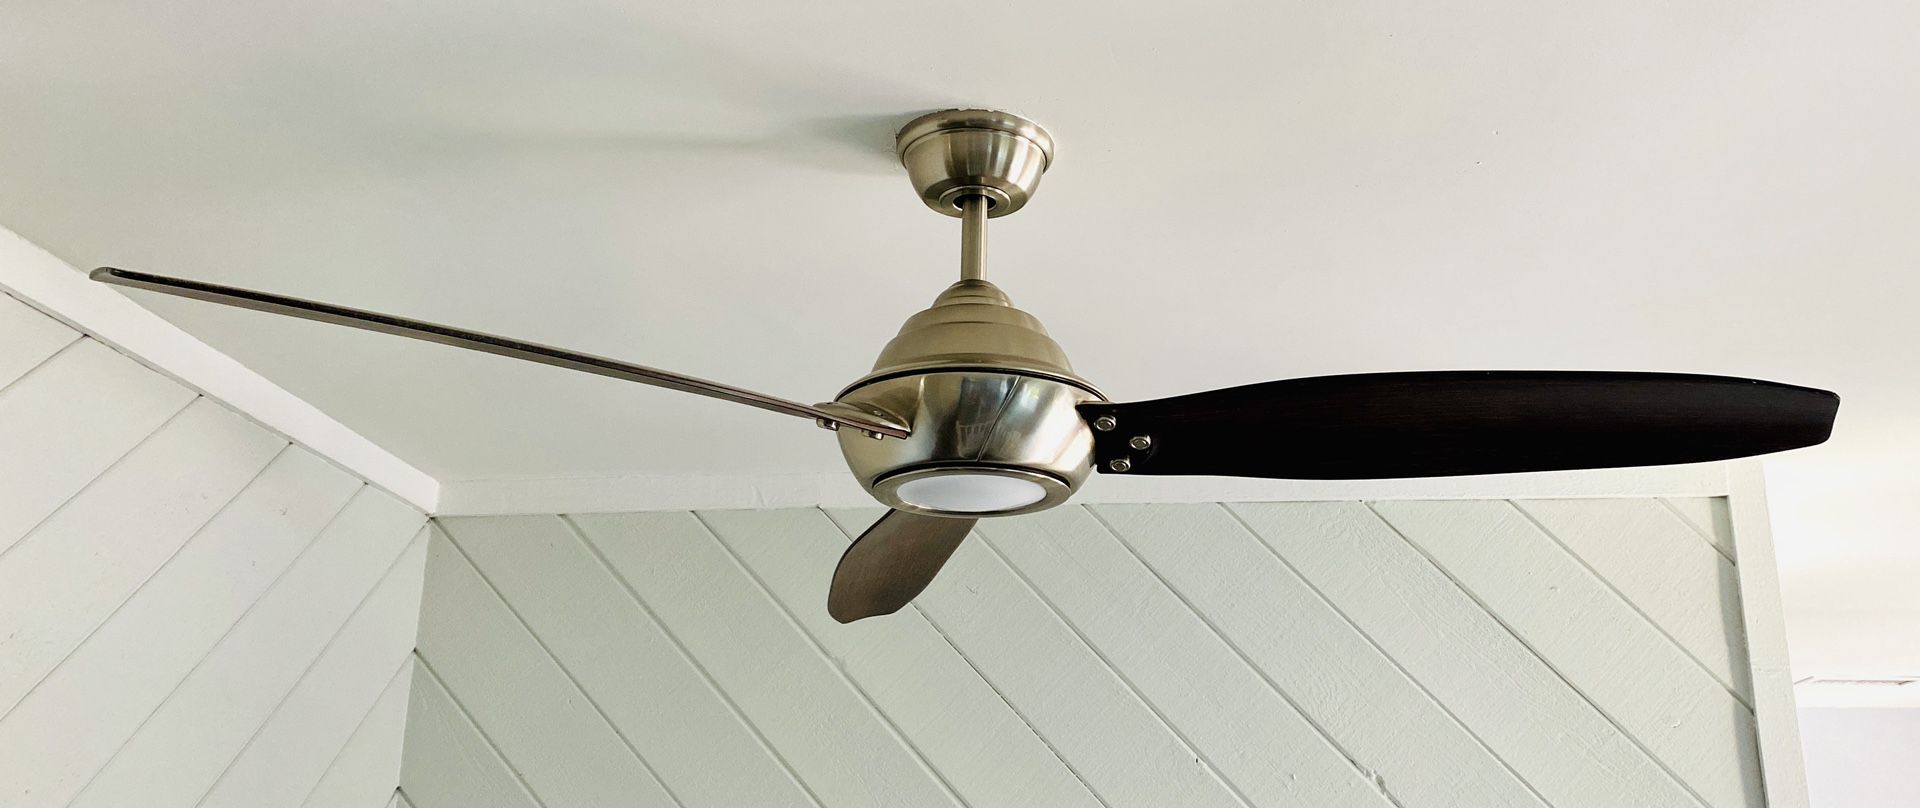 Ceiling fan. 60”. LED dimmable light. Remote. Multi speed.